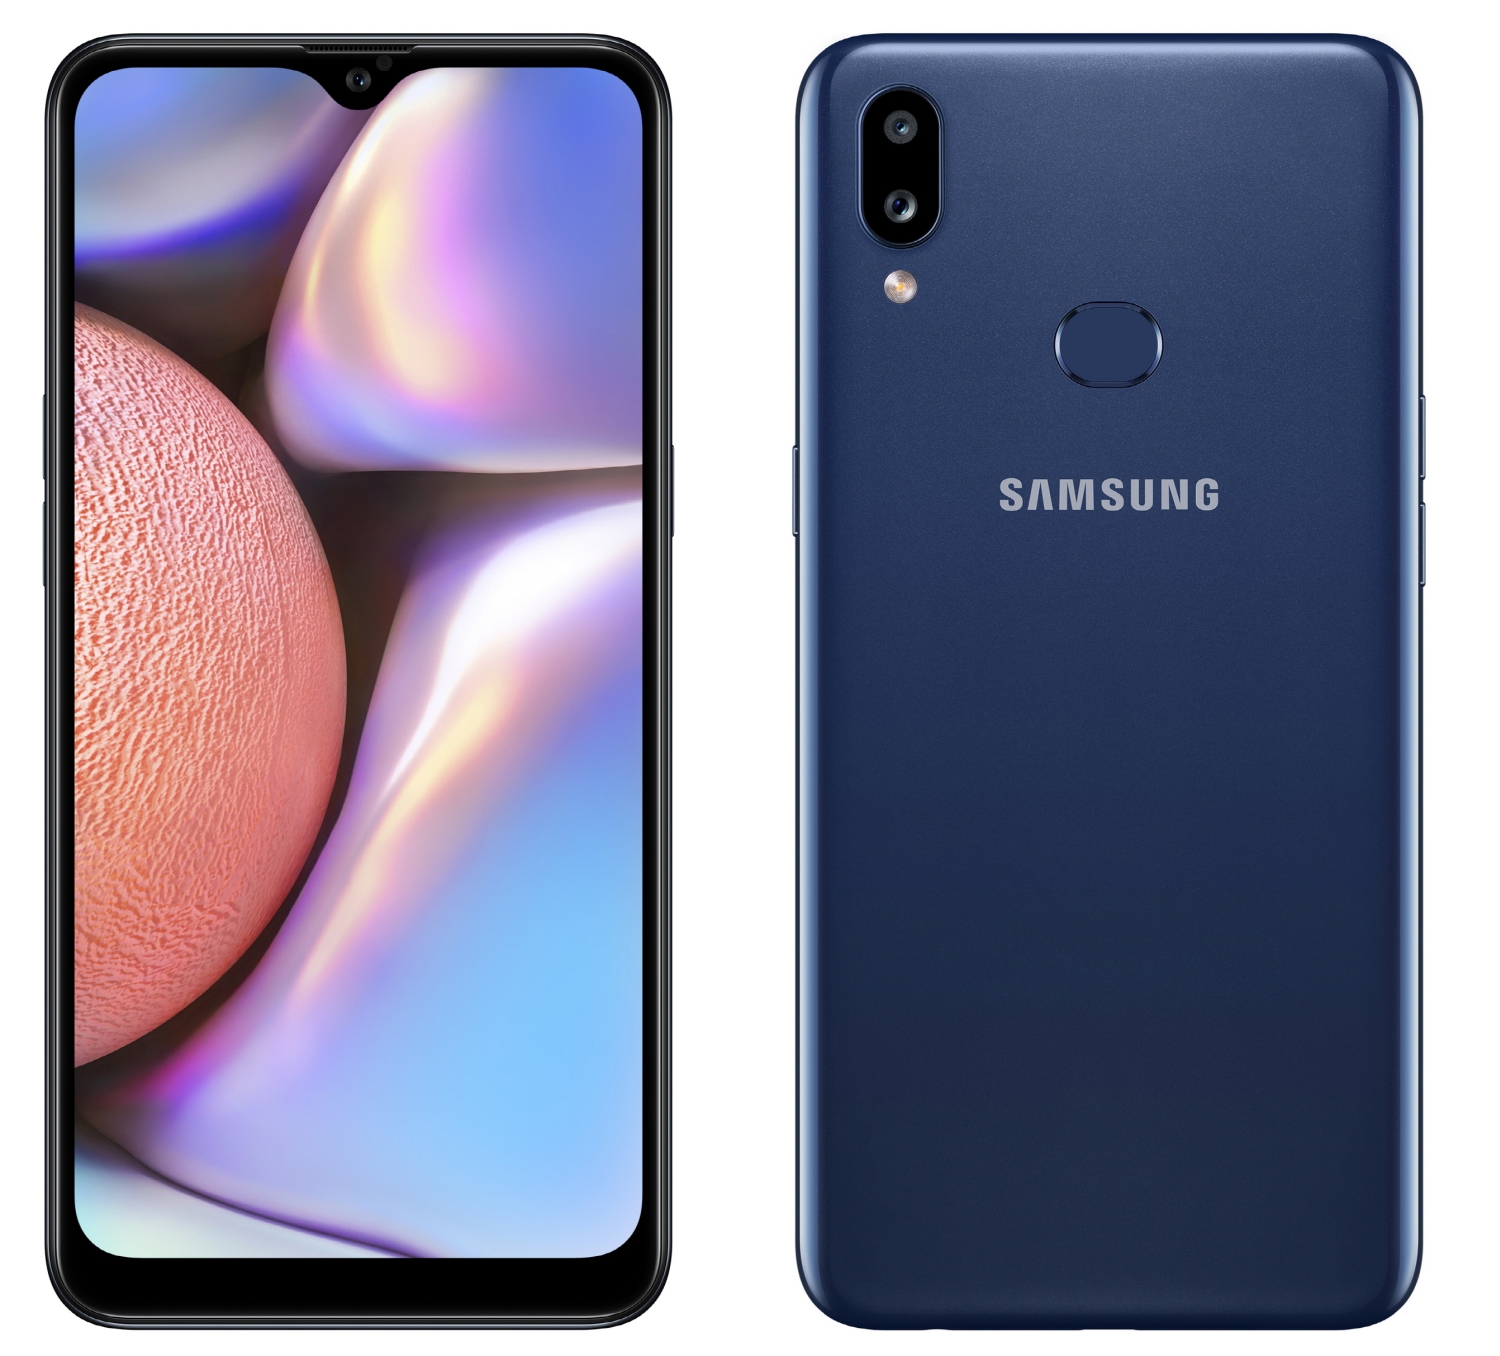 Samsung Updates Its Entry Level Galaxy A10 Smartphone With An Extra